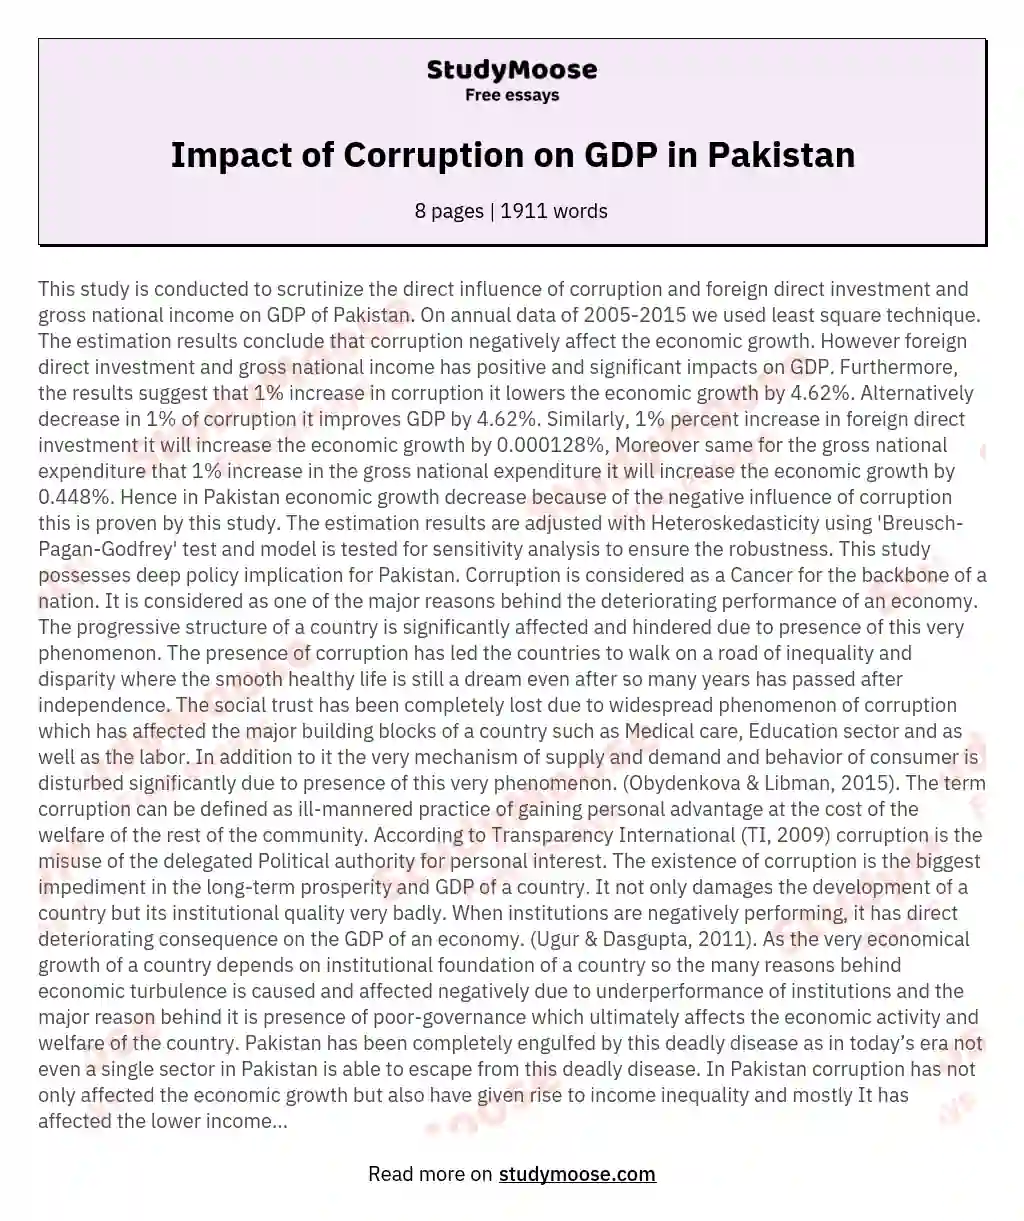 Impact of Corruption on GDP in Pakistan essay